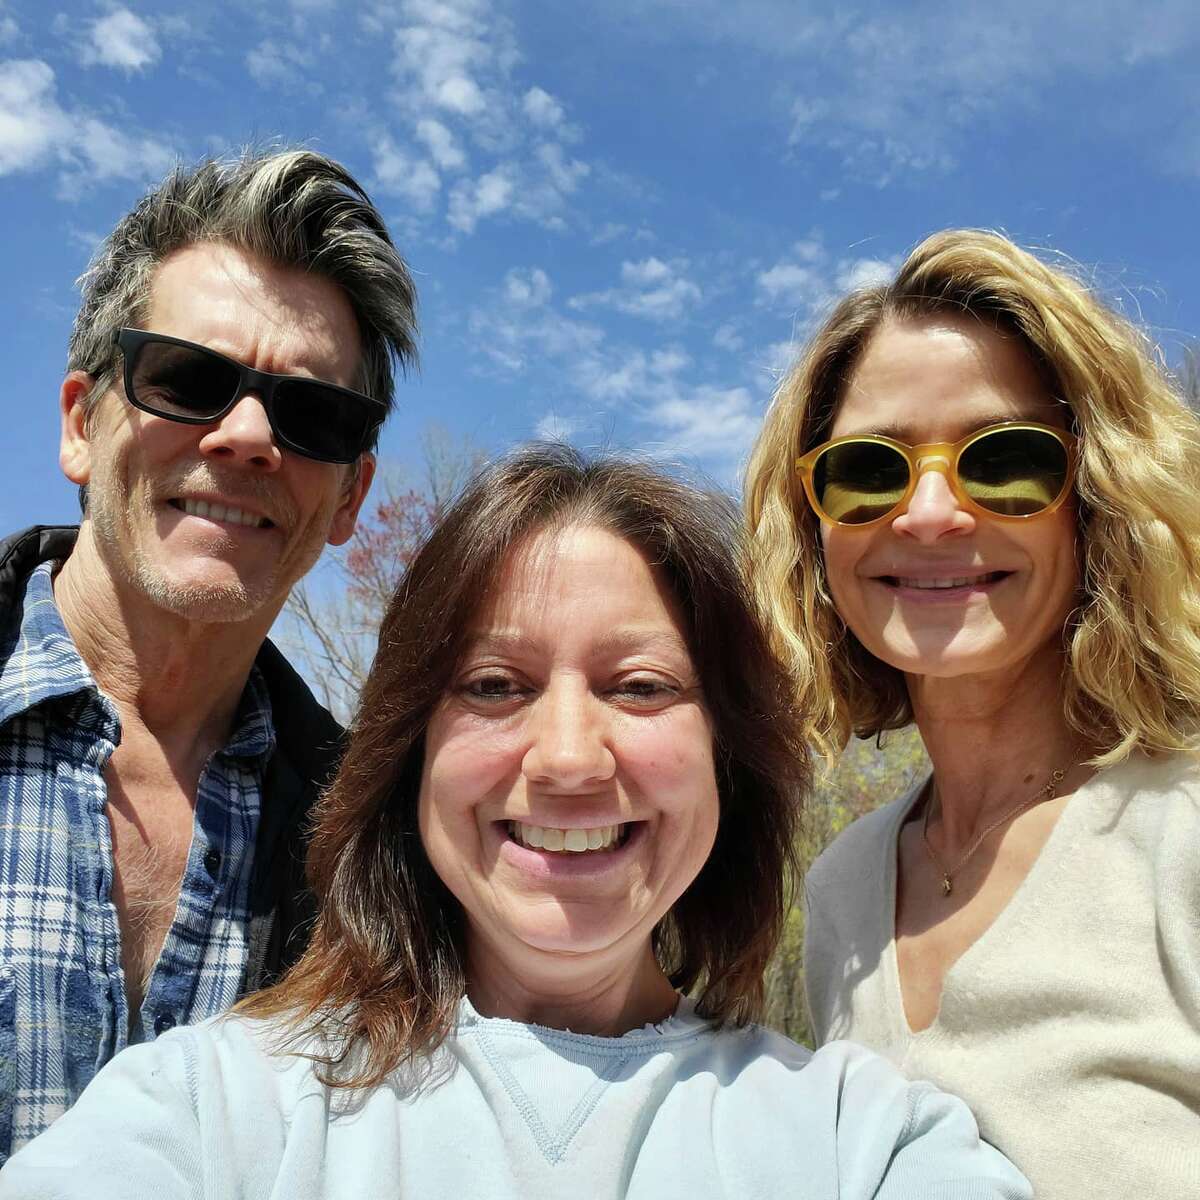 Actors Kevin Bacon (left) and Kyra Sedgwick (right) took a selfie with Tracy Longoria, owner of Aussakita Acres Farm in Manchester, Conn. on Tuesday, April 27, 2021. The actors selected two goats from the farm to join the two they purchased from the farm in 2020. 